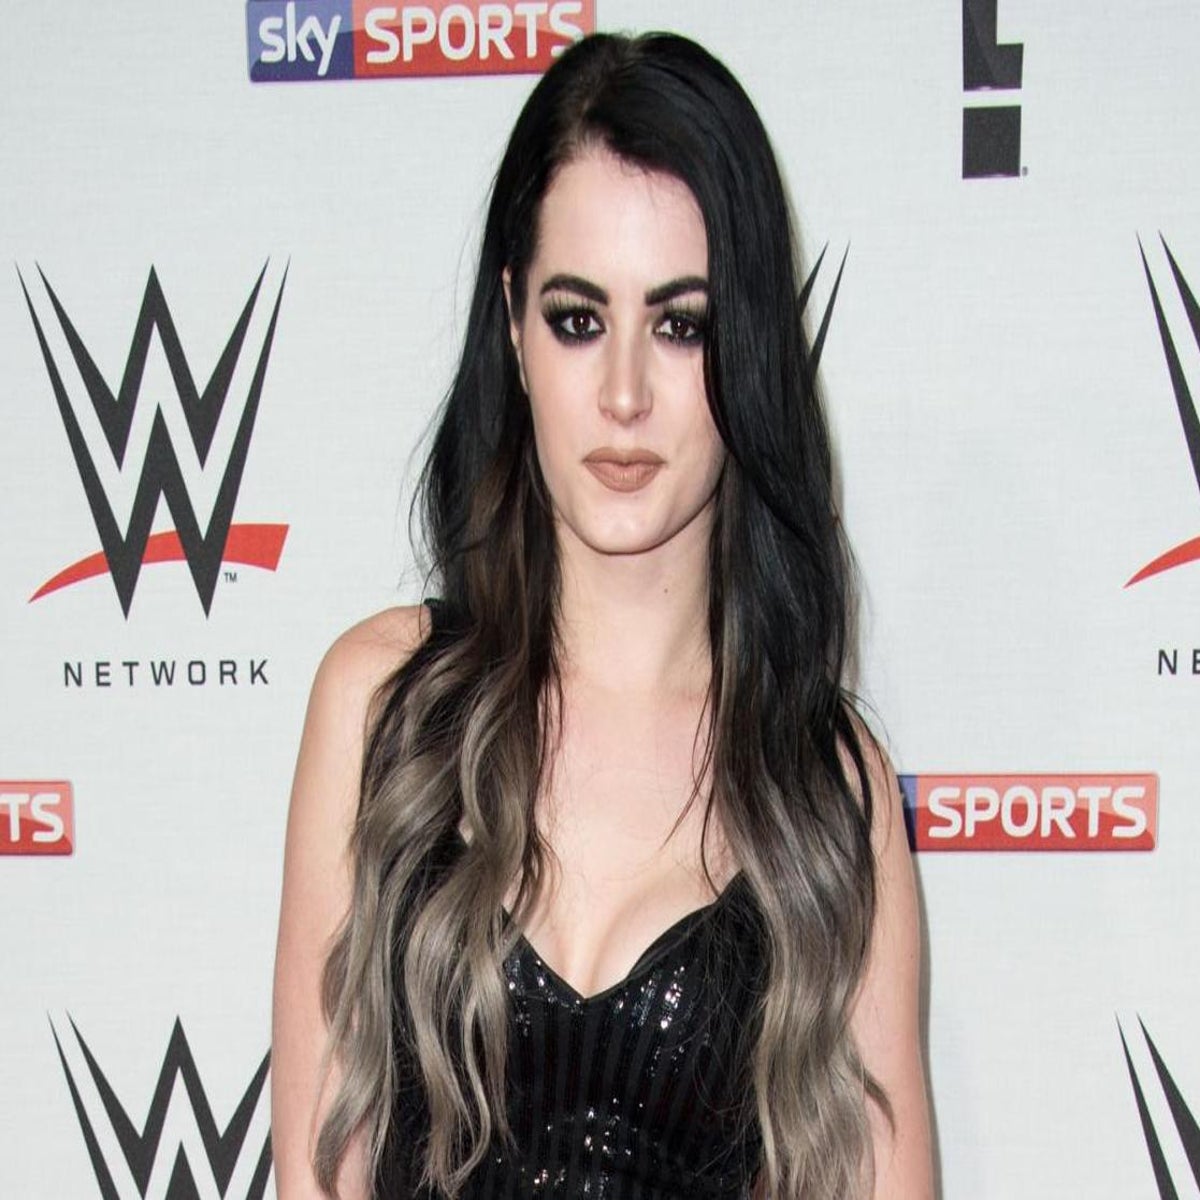 Wwe Xxx Sex Videos Brazzers Com - Paige sex tape leak caused WWE star to develop anorexia | The Independent